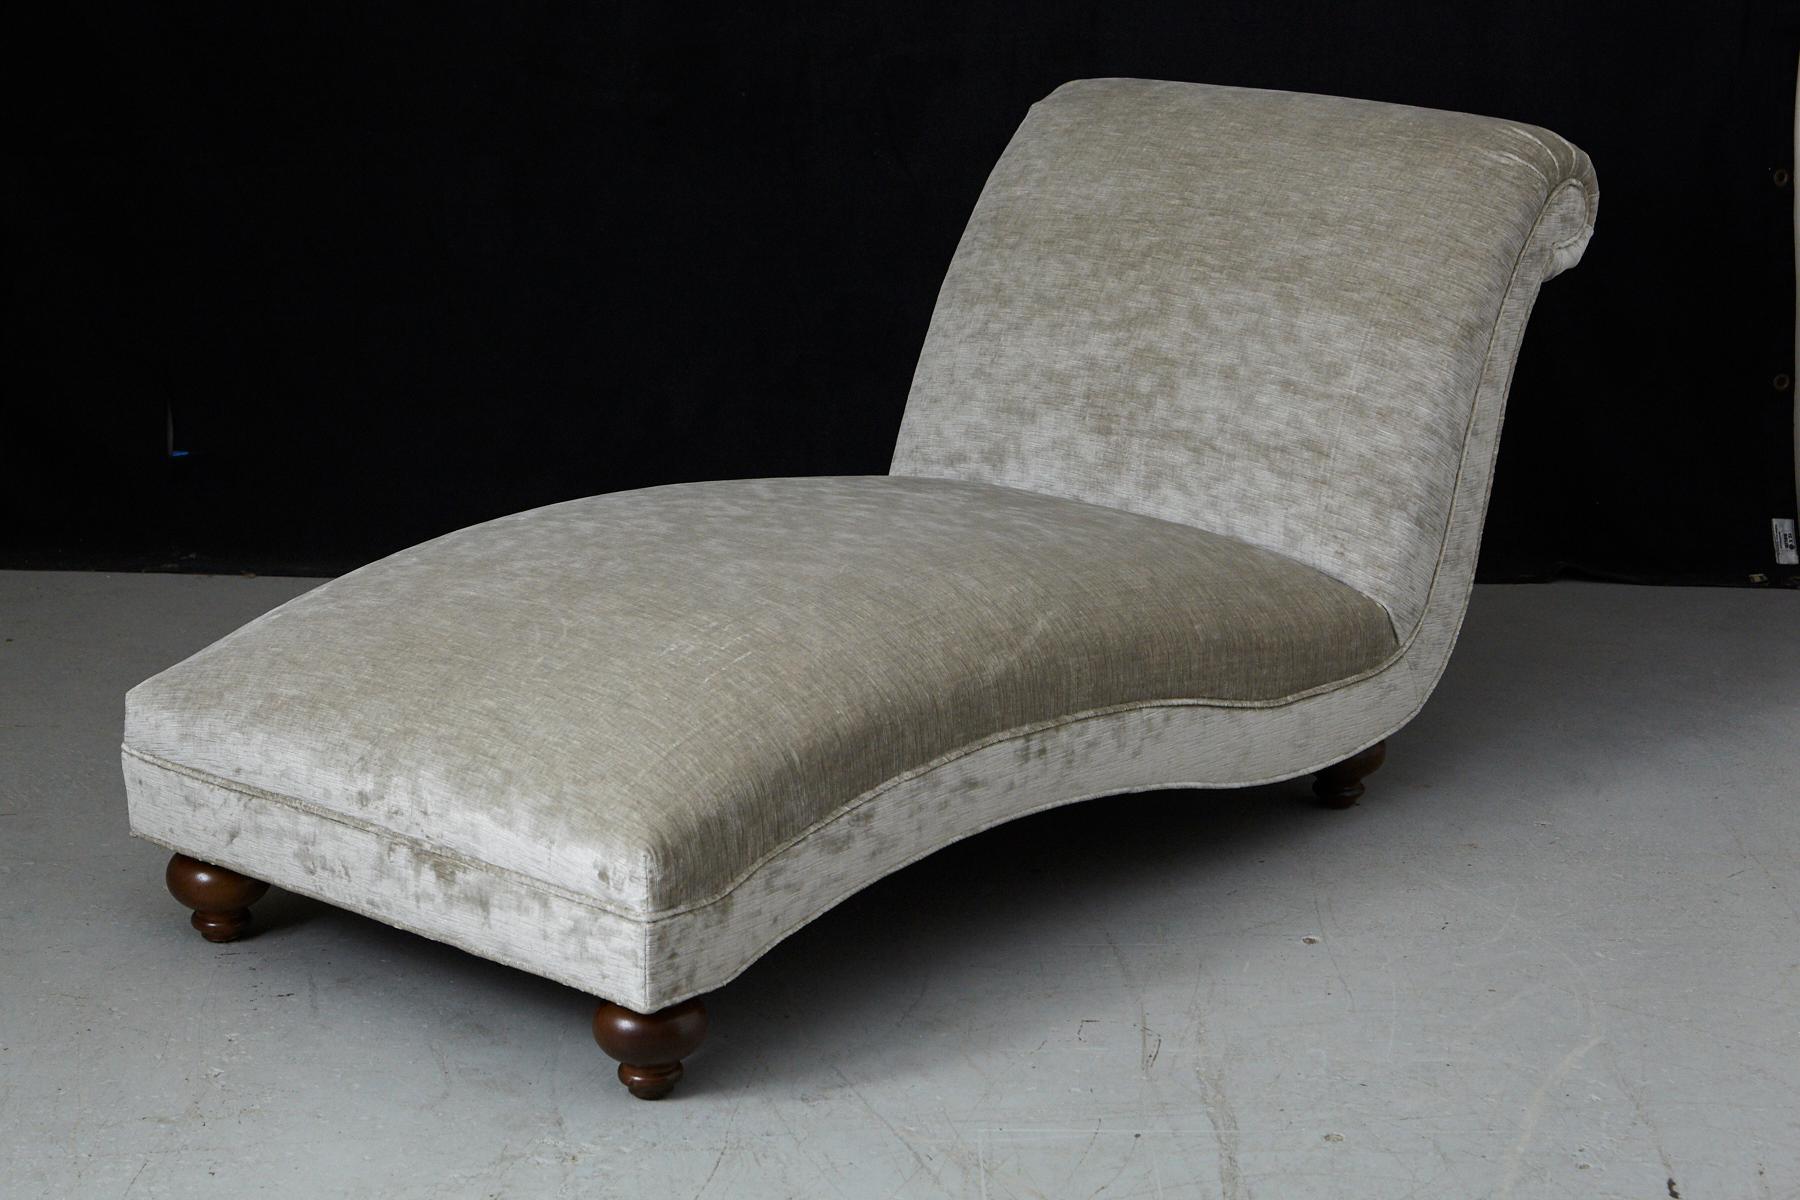 20th Century French Chaise Longue with New Upholstery in Striae Velvet, circa 1930s For Sale